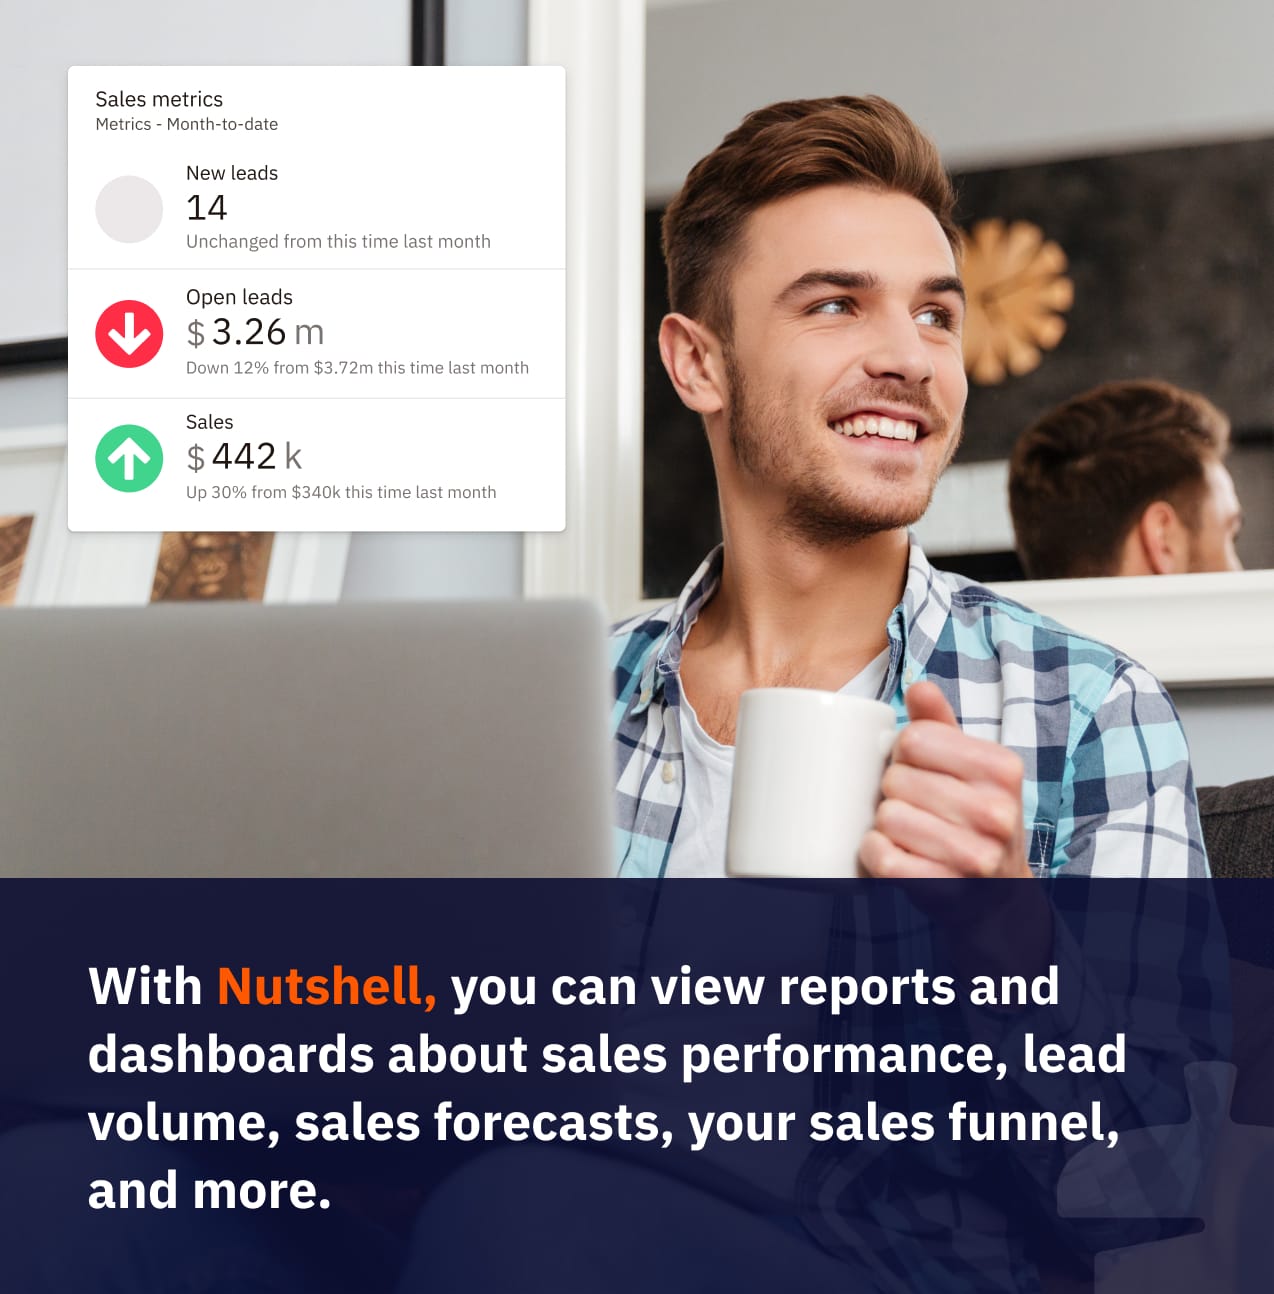 With Nutshell, you can view reports and dashboards about sales performance, lead volume, sales forecasts, your sales funnel, and more.